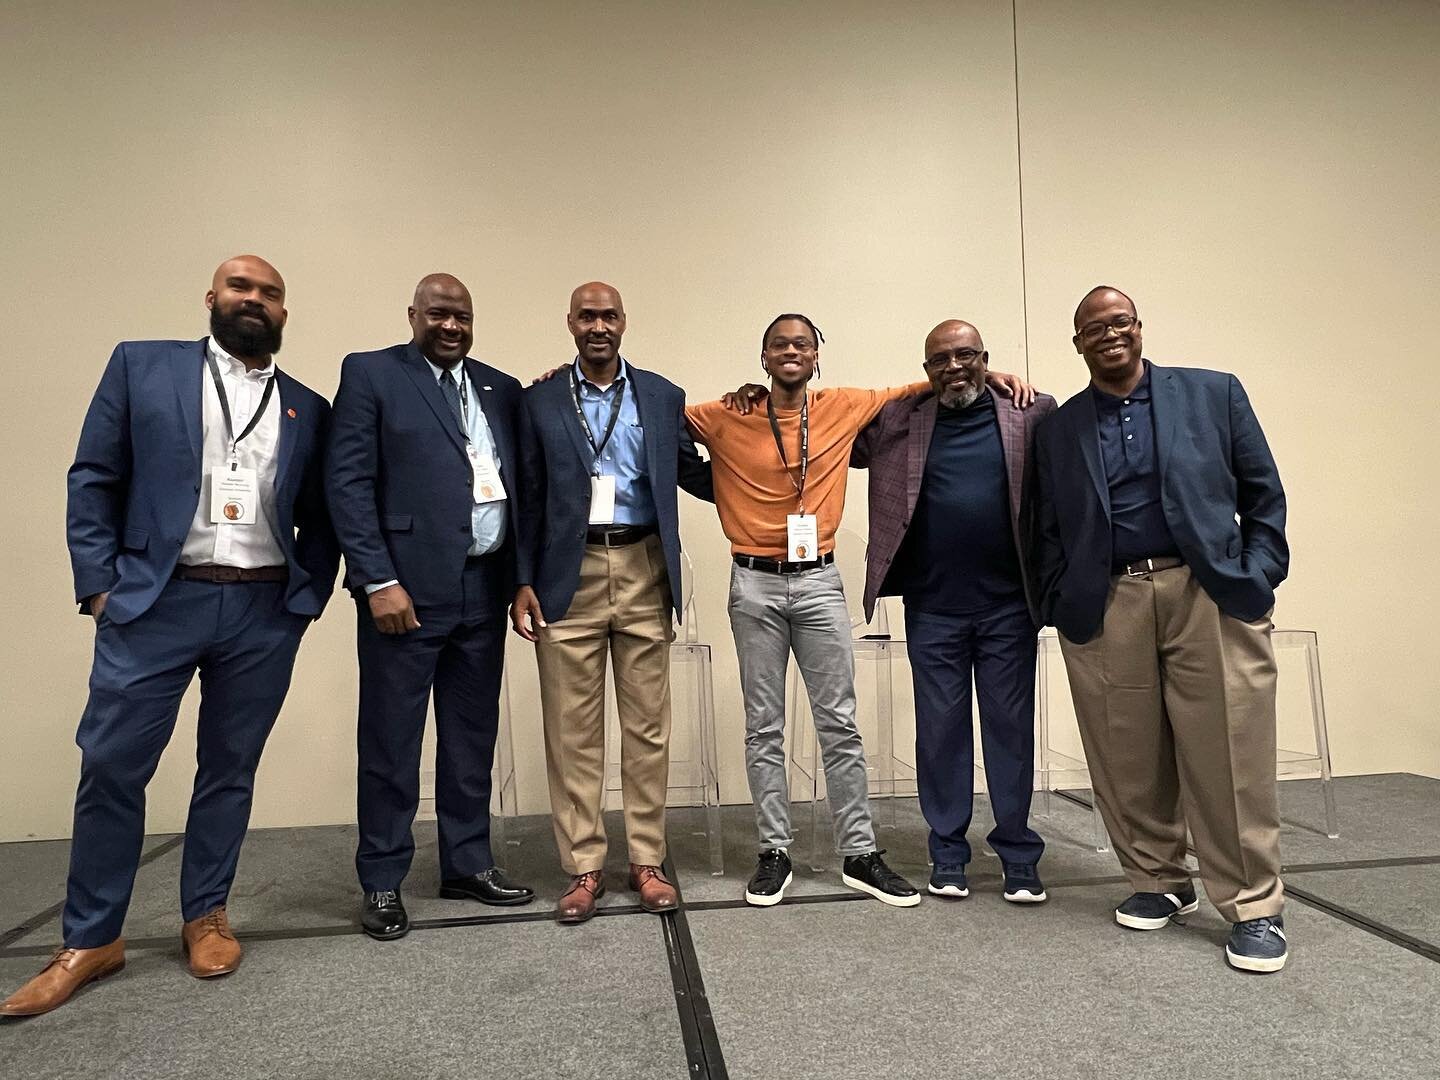 Brownstone President Dale Collier sat on a panel for the 2023 Clemson University Men of Color National Summit with other great SC construction industry leaders to discuss Careers in Construction with students from across the state. As a minority-owne